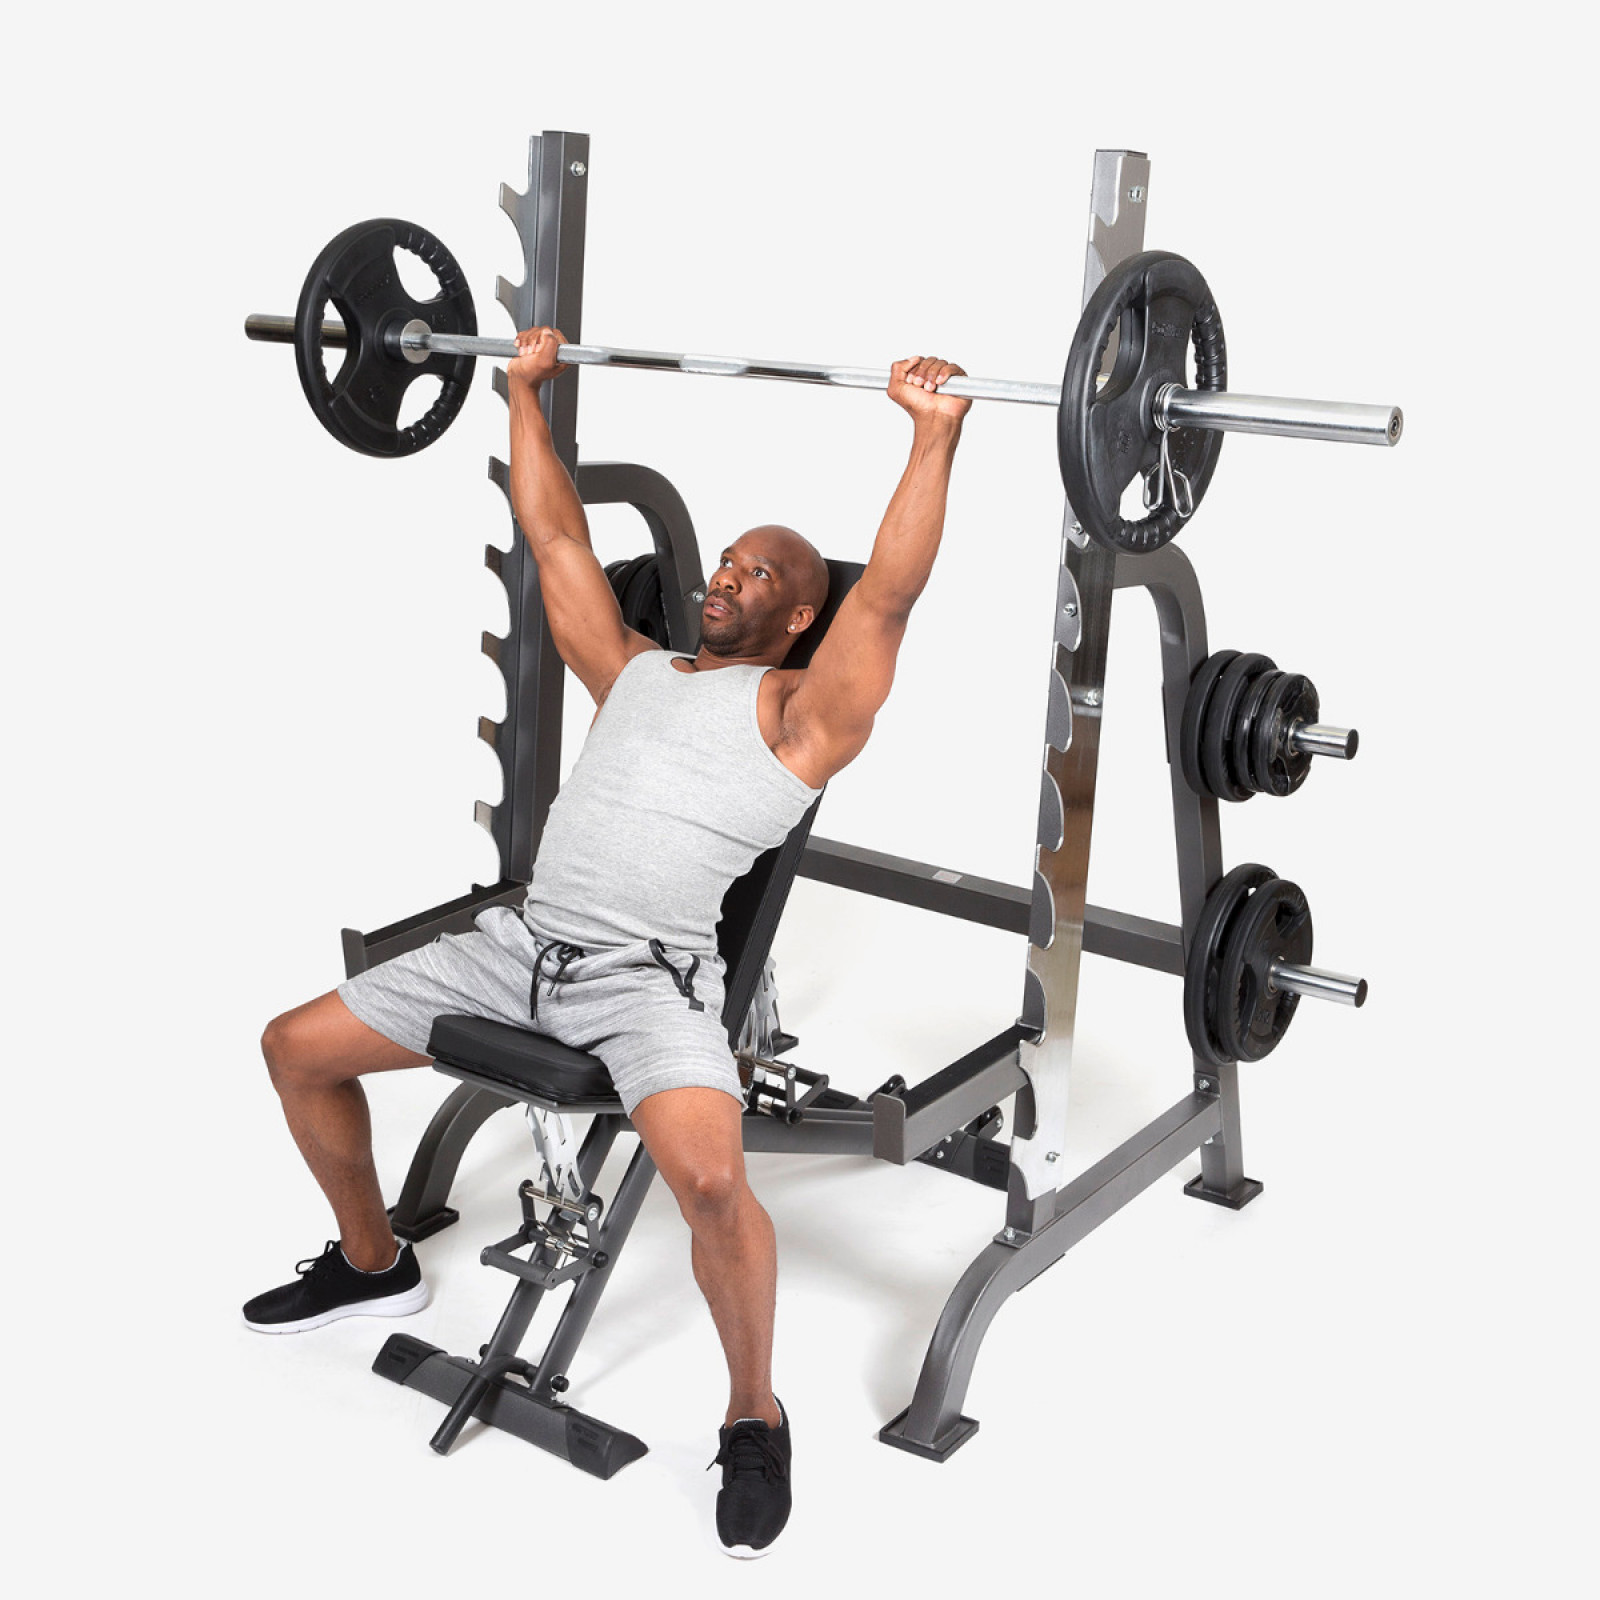 Weight Bench Press With Barbell Squat Rack Adjustable Fitness Gym Training Set 